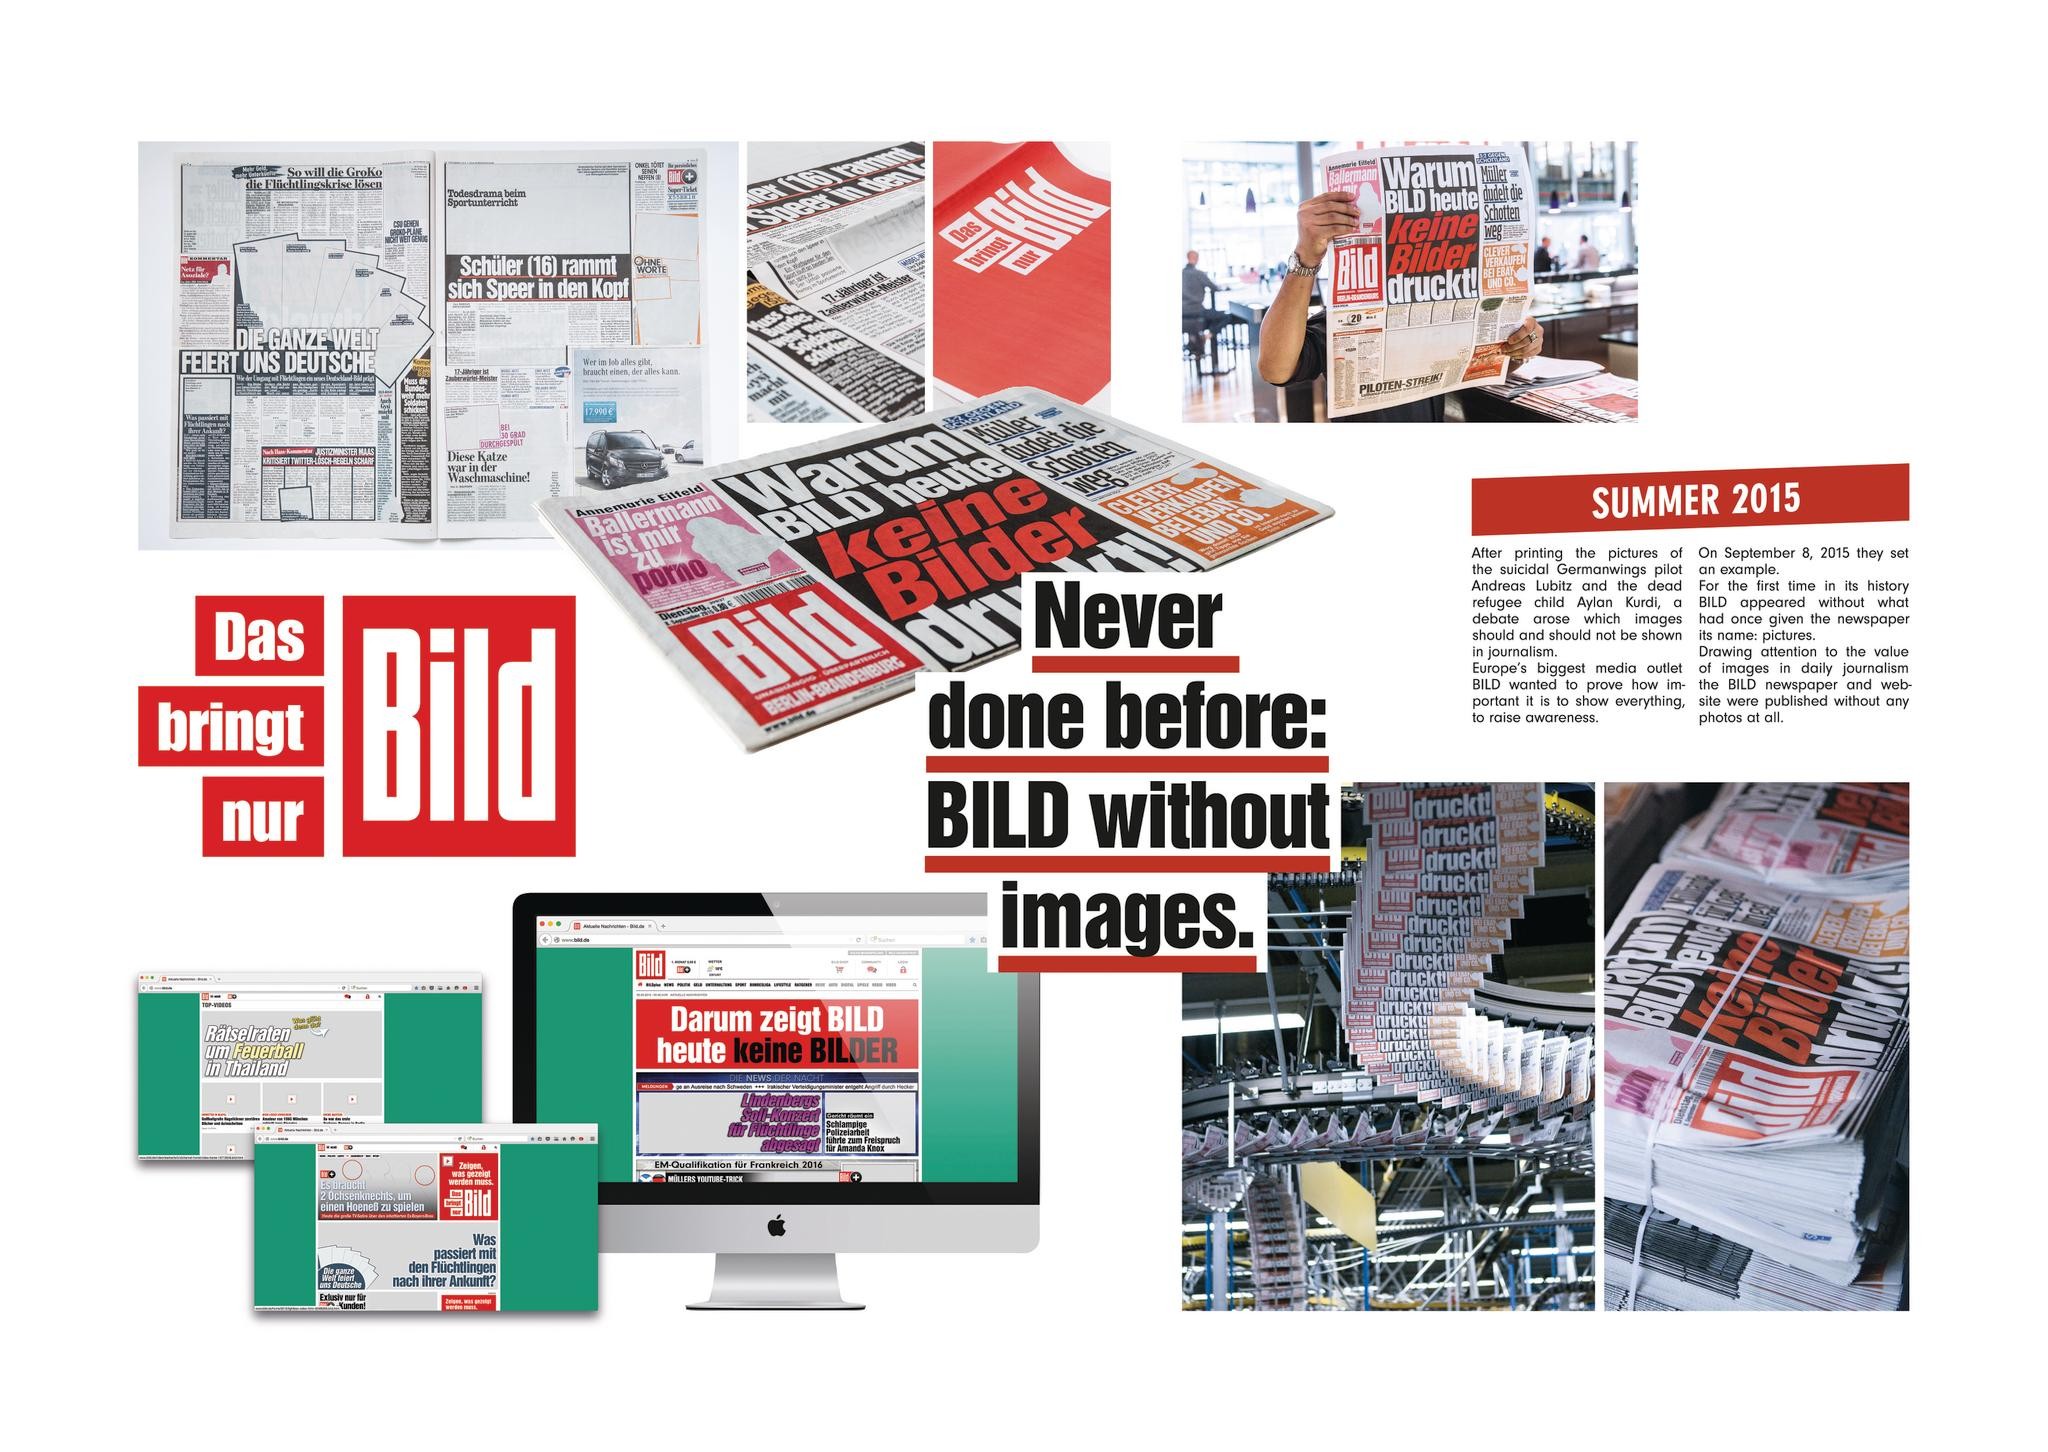 BILD without images